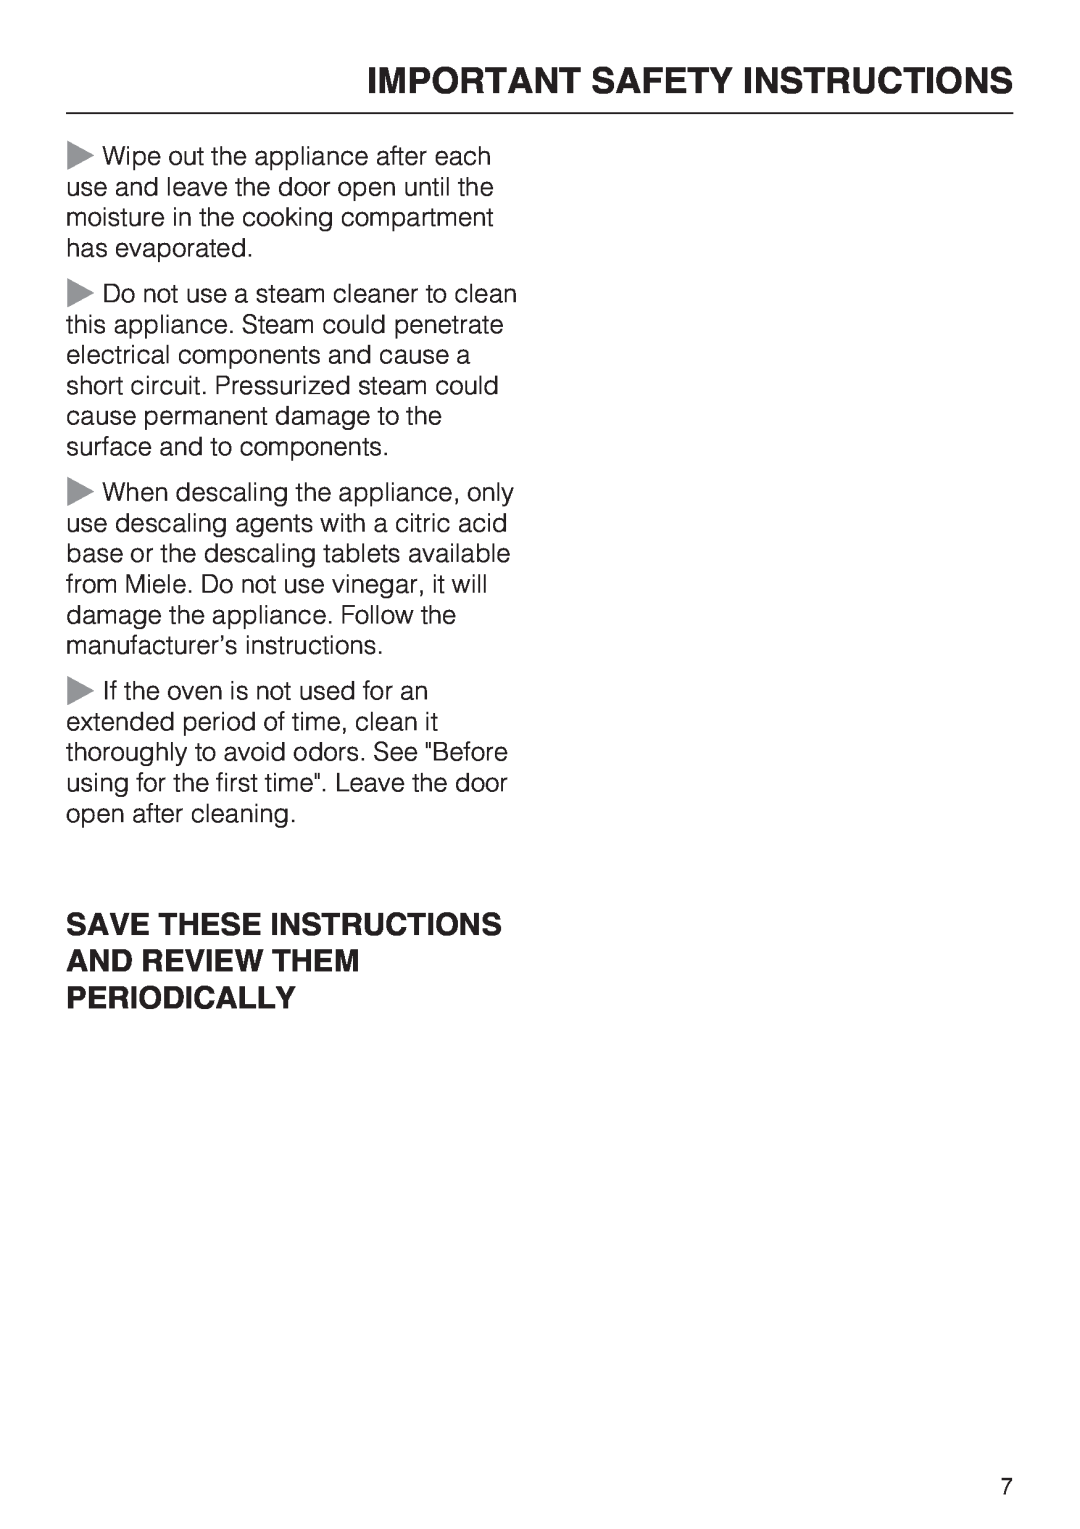 Miele DG 4088, DG4082 Save These Instructions And Review Them, Periodically, Important Safety Instructions 